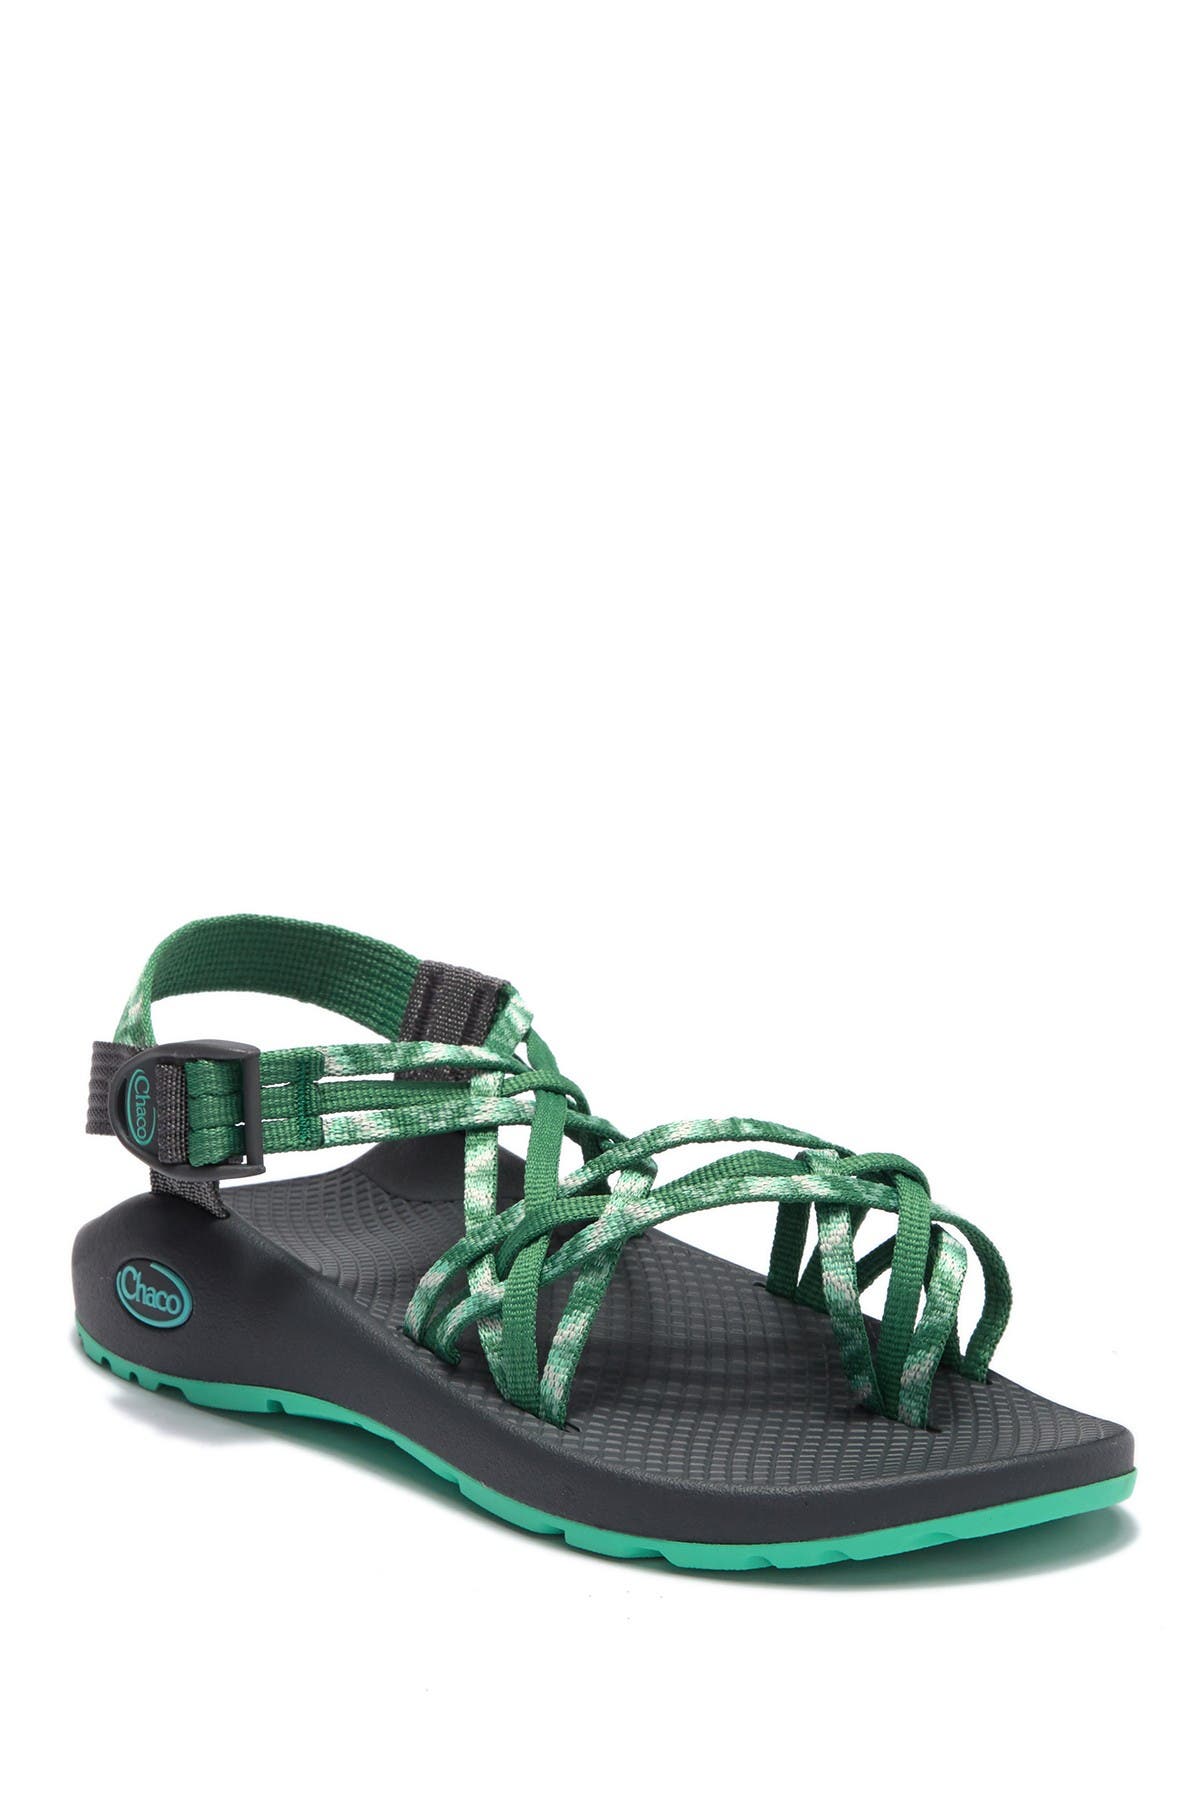 chaco zx3